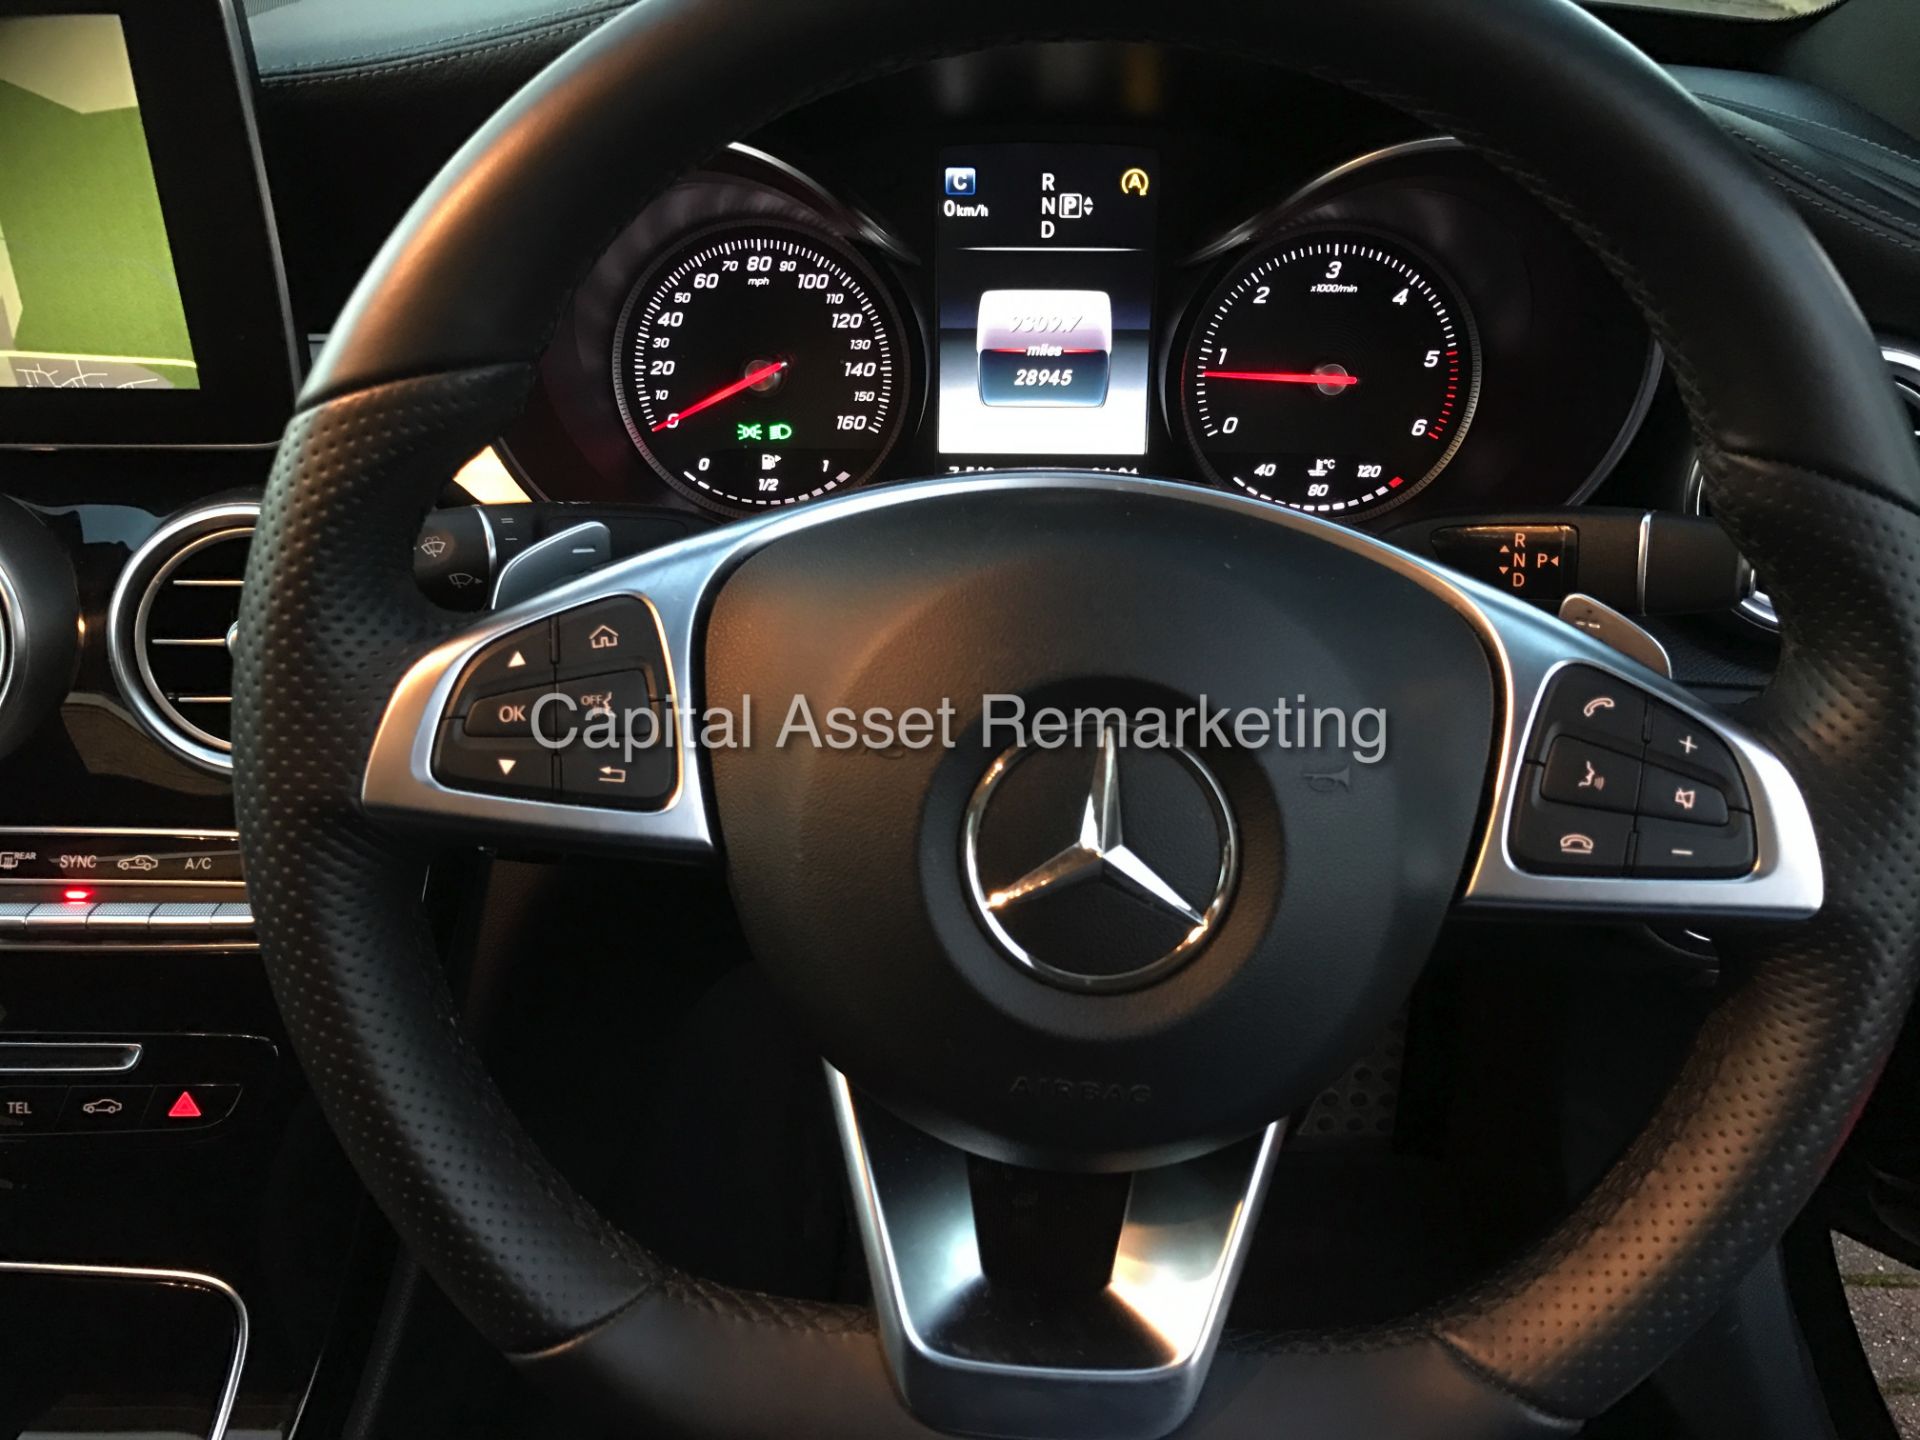 ON SALE MERCEDES C220CDI "PREMIUM PLUS" 7G TRONIC (2015 MODEL) PAN ROOF - COMMAND NAV - LEATHER - - Image 20 of 28